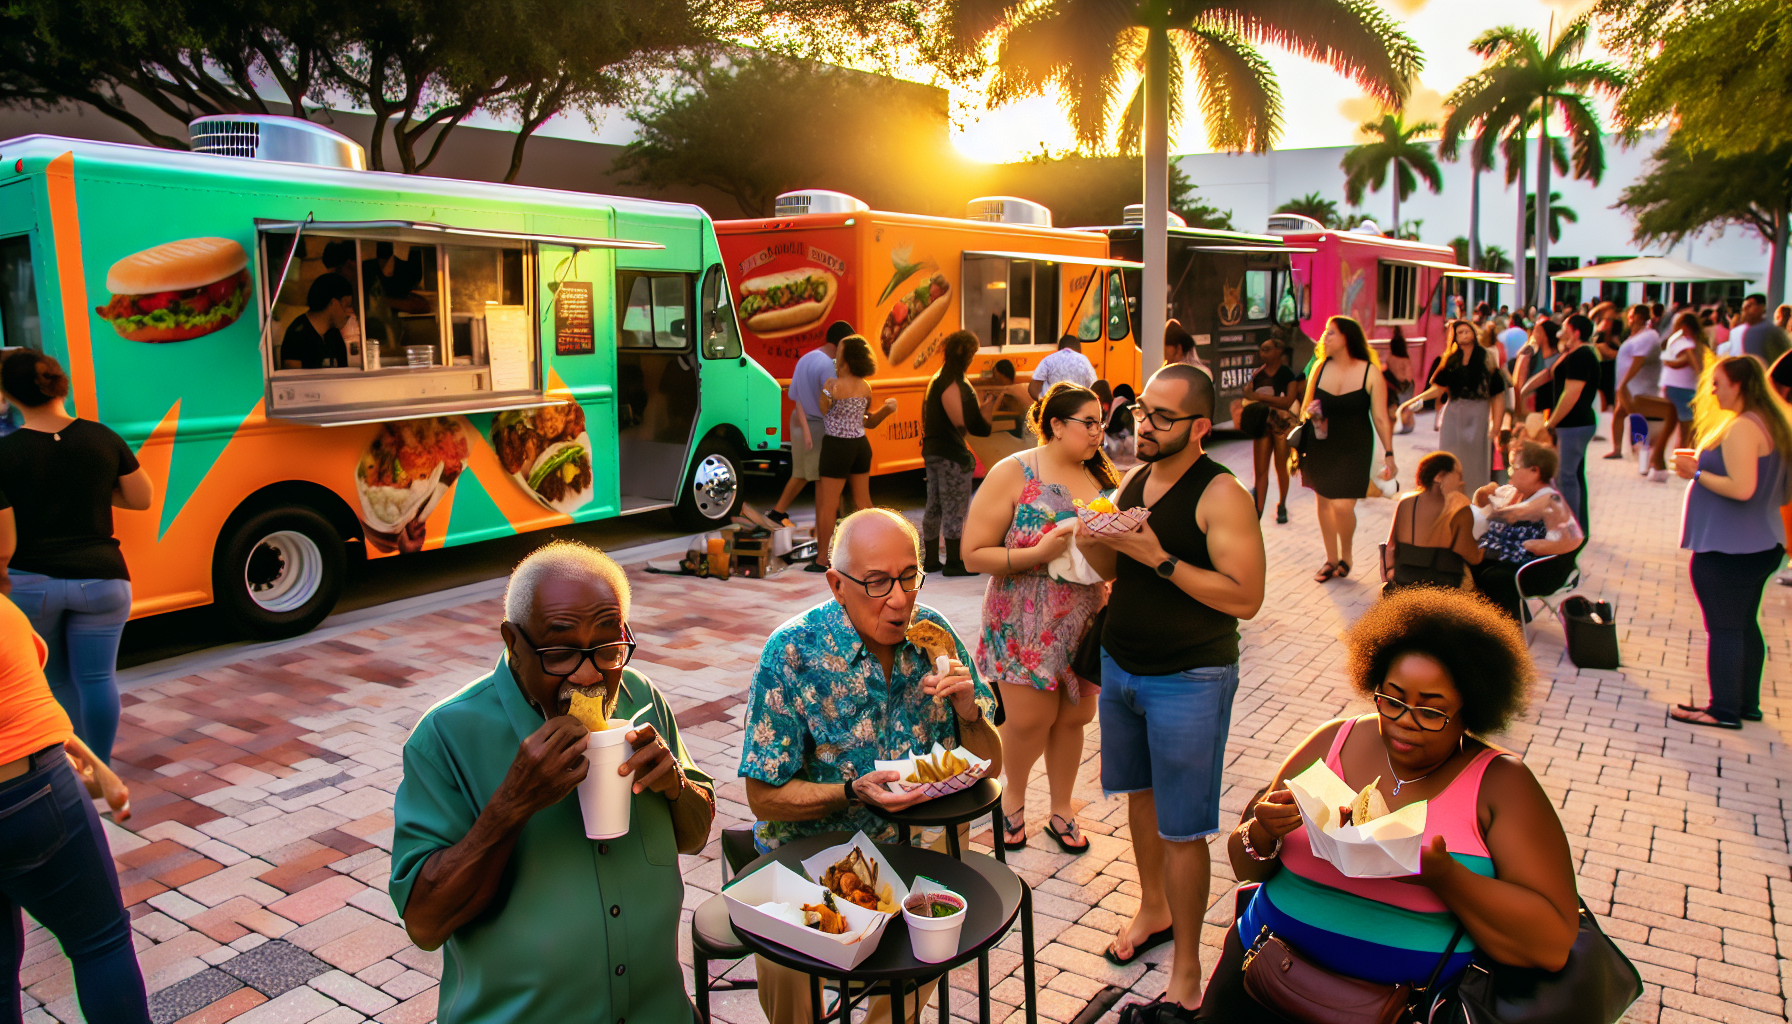 Exciting food truck event in Fort Lauderdale